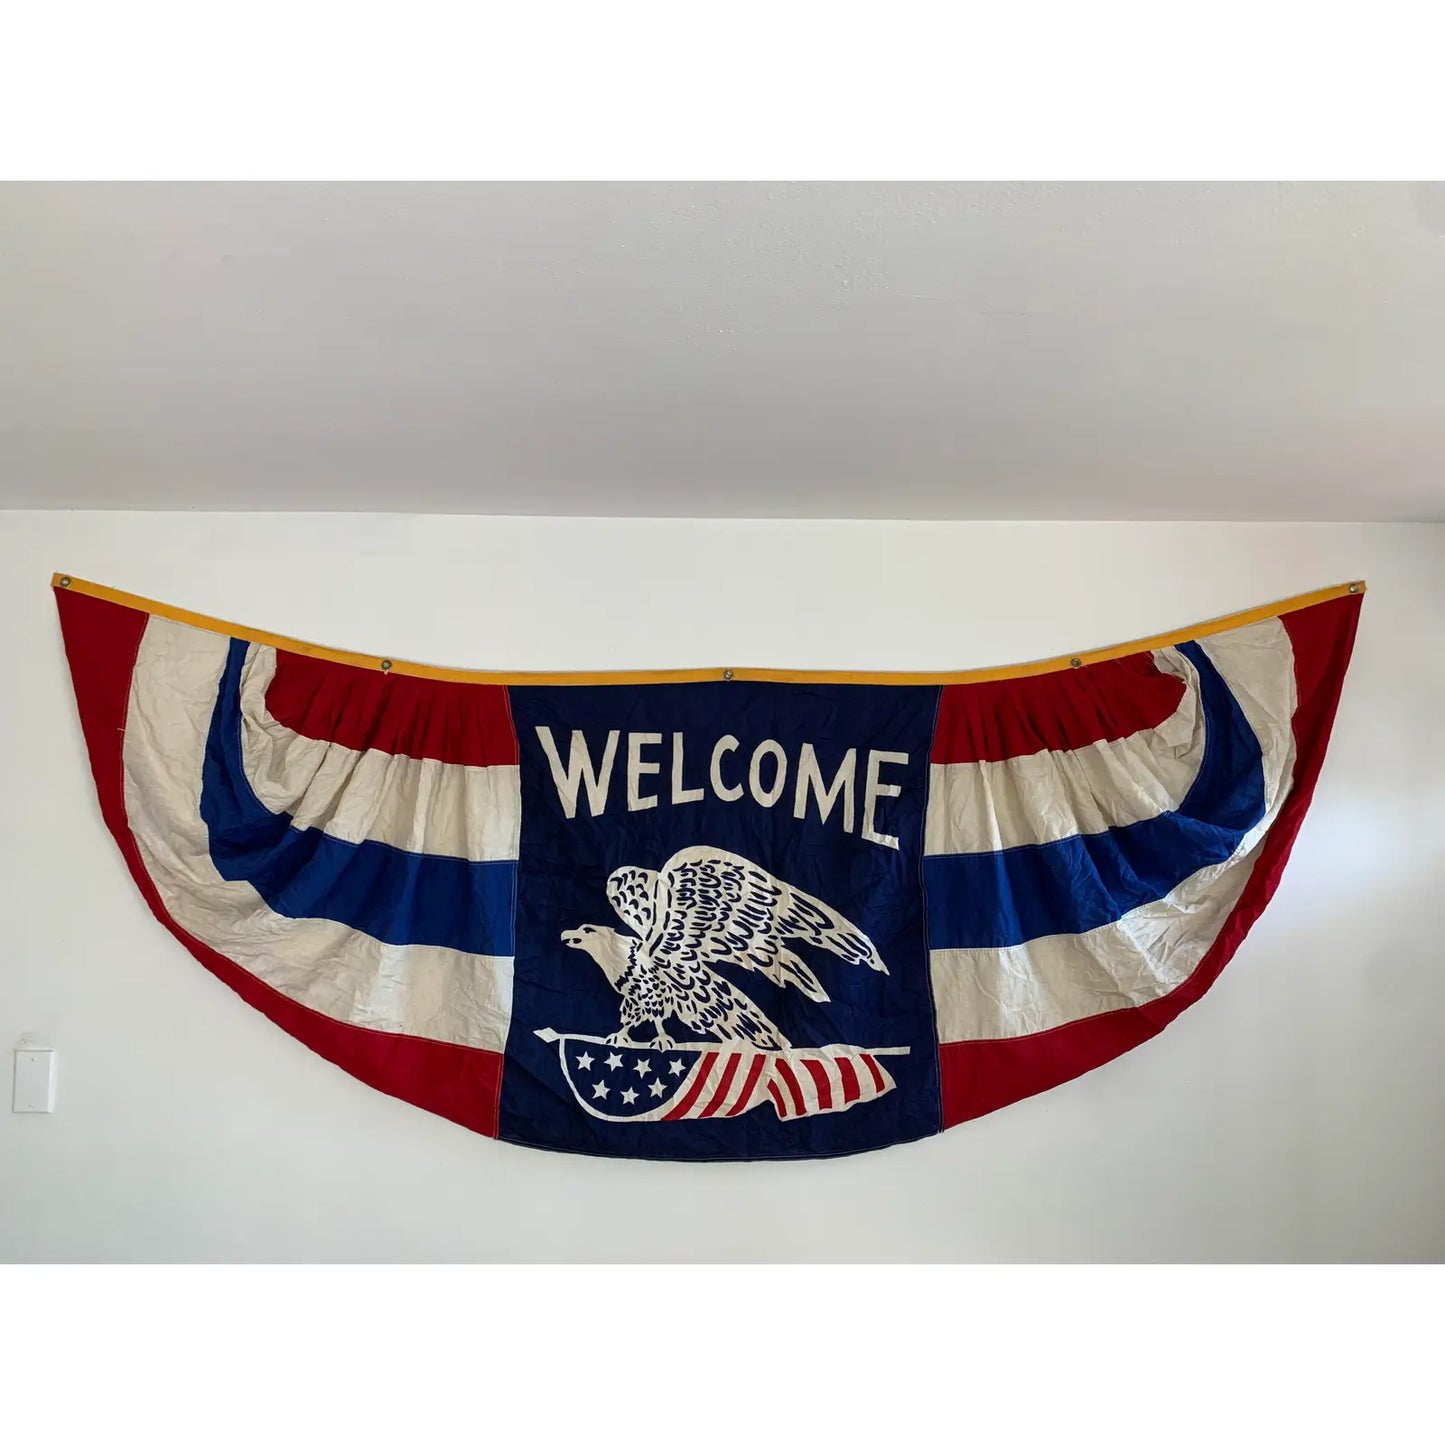 Vintage Welcome Pleated Fan Bunting